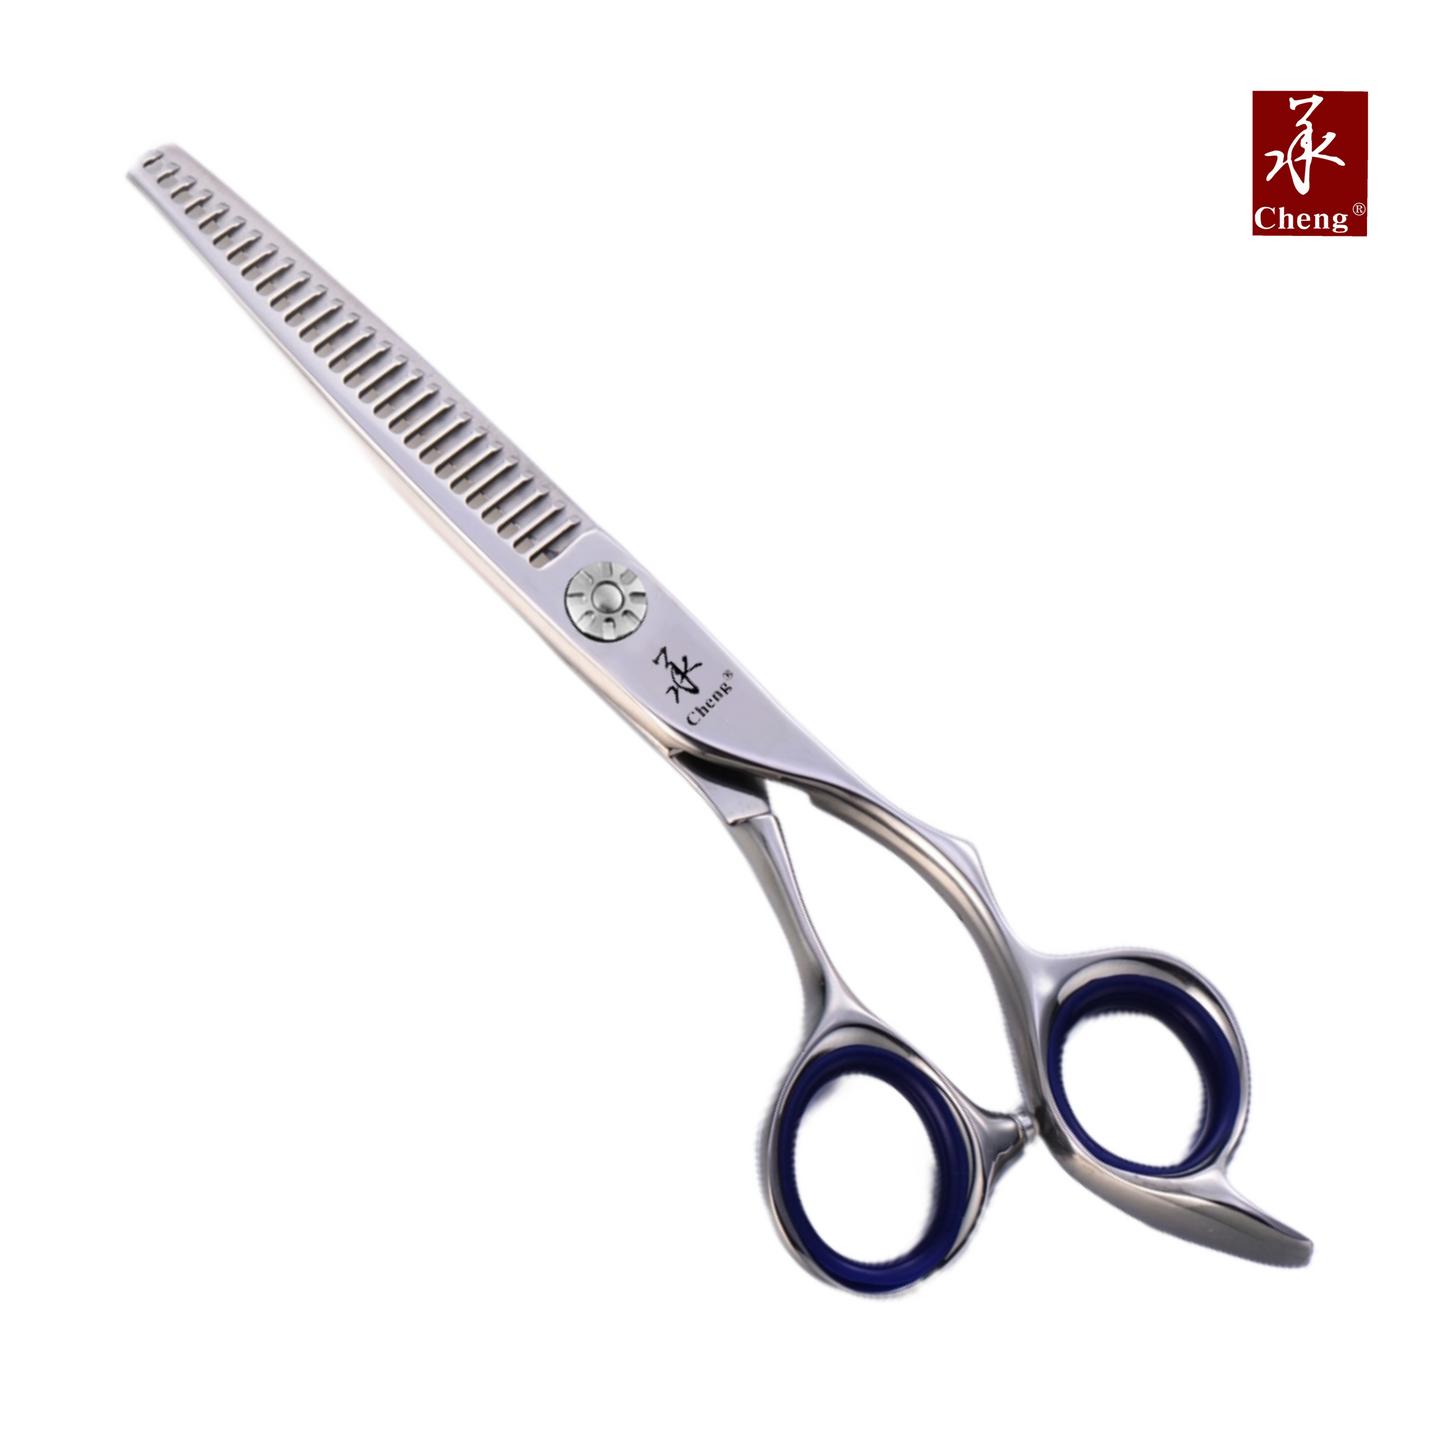 UT-614TZ Hair Thinning Scissors Cutting 6"14T Stainless Steel About=45%